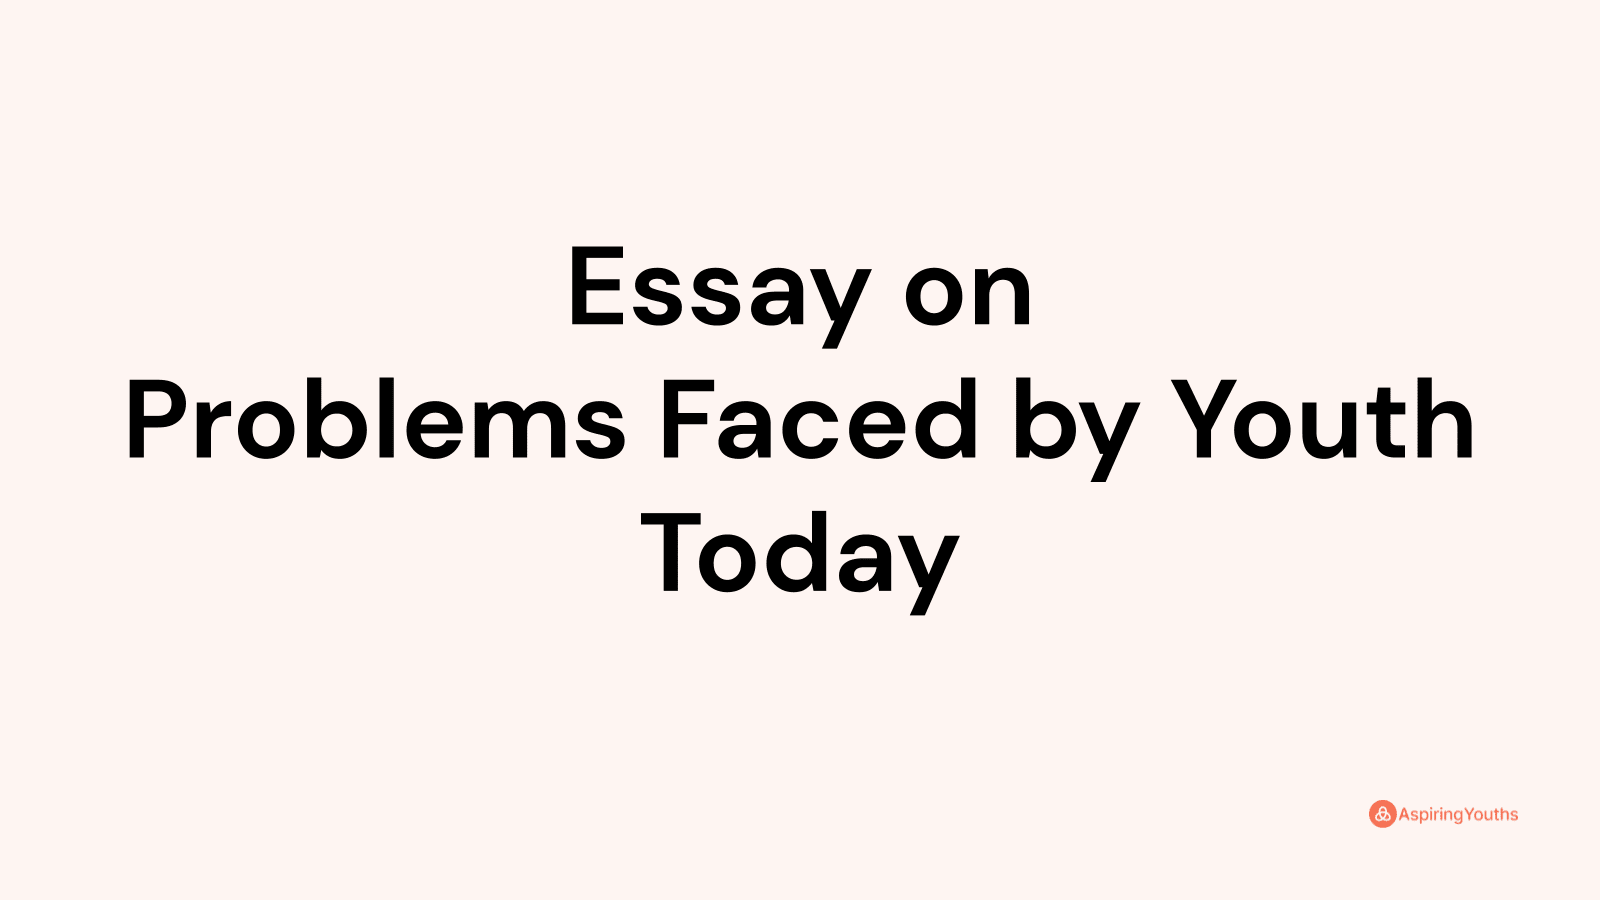 social issues faced by youth today essay